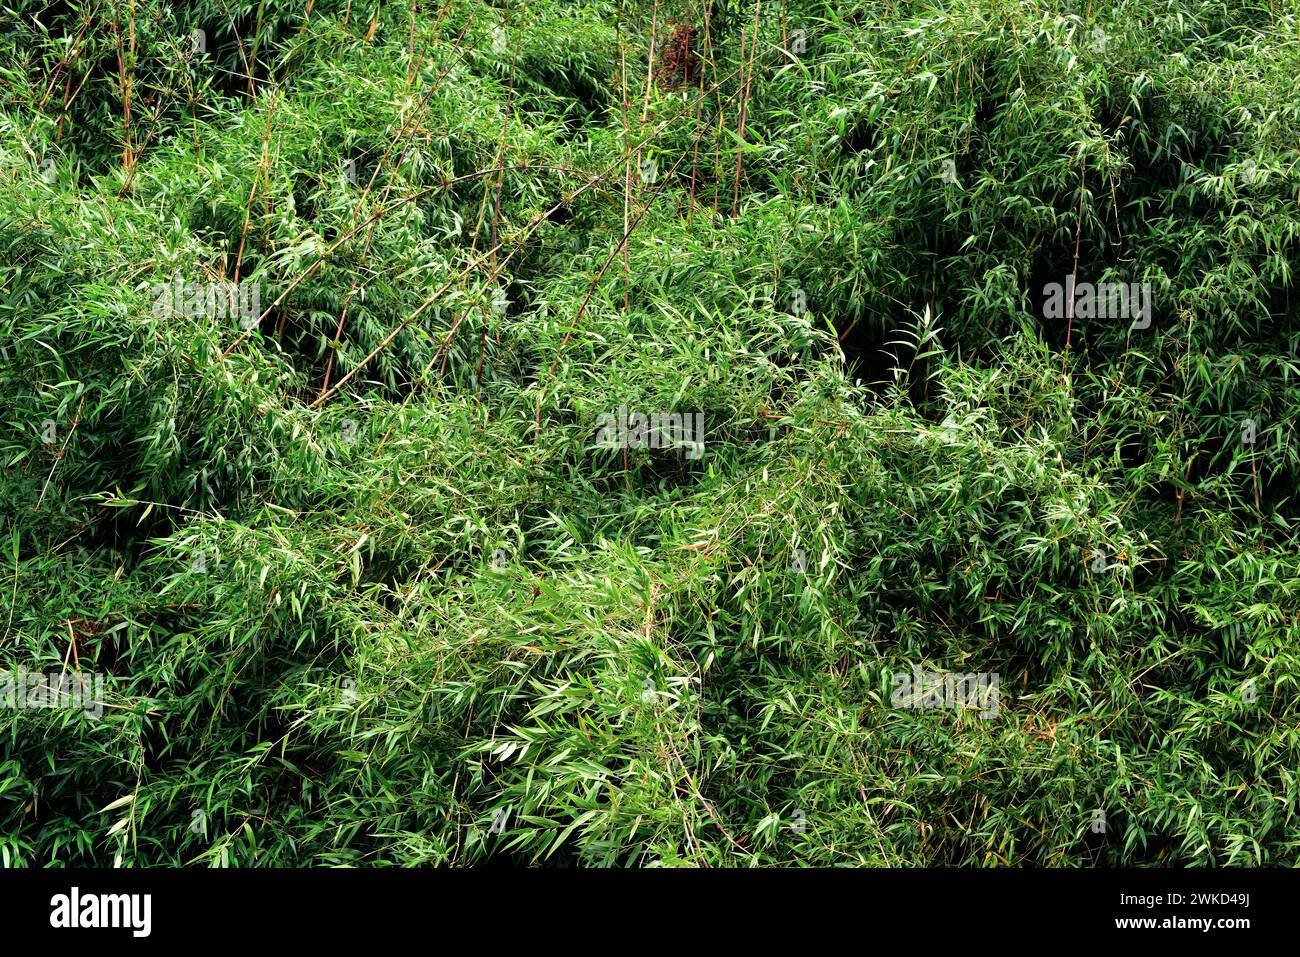 Quila (Chusquea quila) is a climbing shrub endemic to temperate forests to Chile and Argentina. This photo was taken in Llanquihue Lake, Puerto Varas, Stock Photo